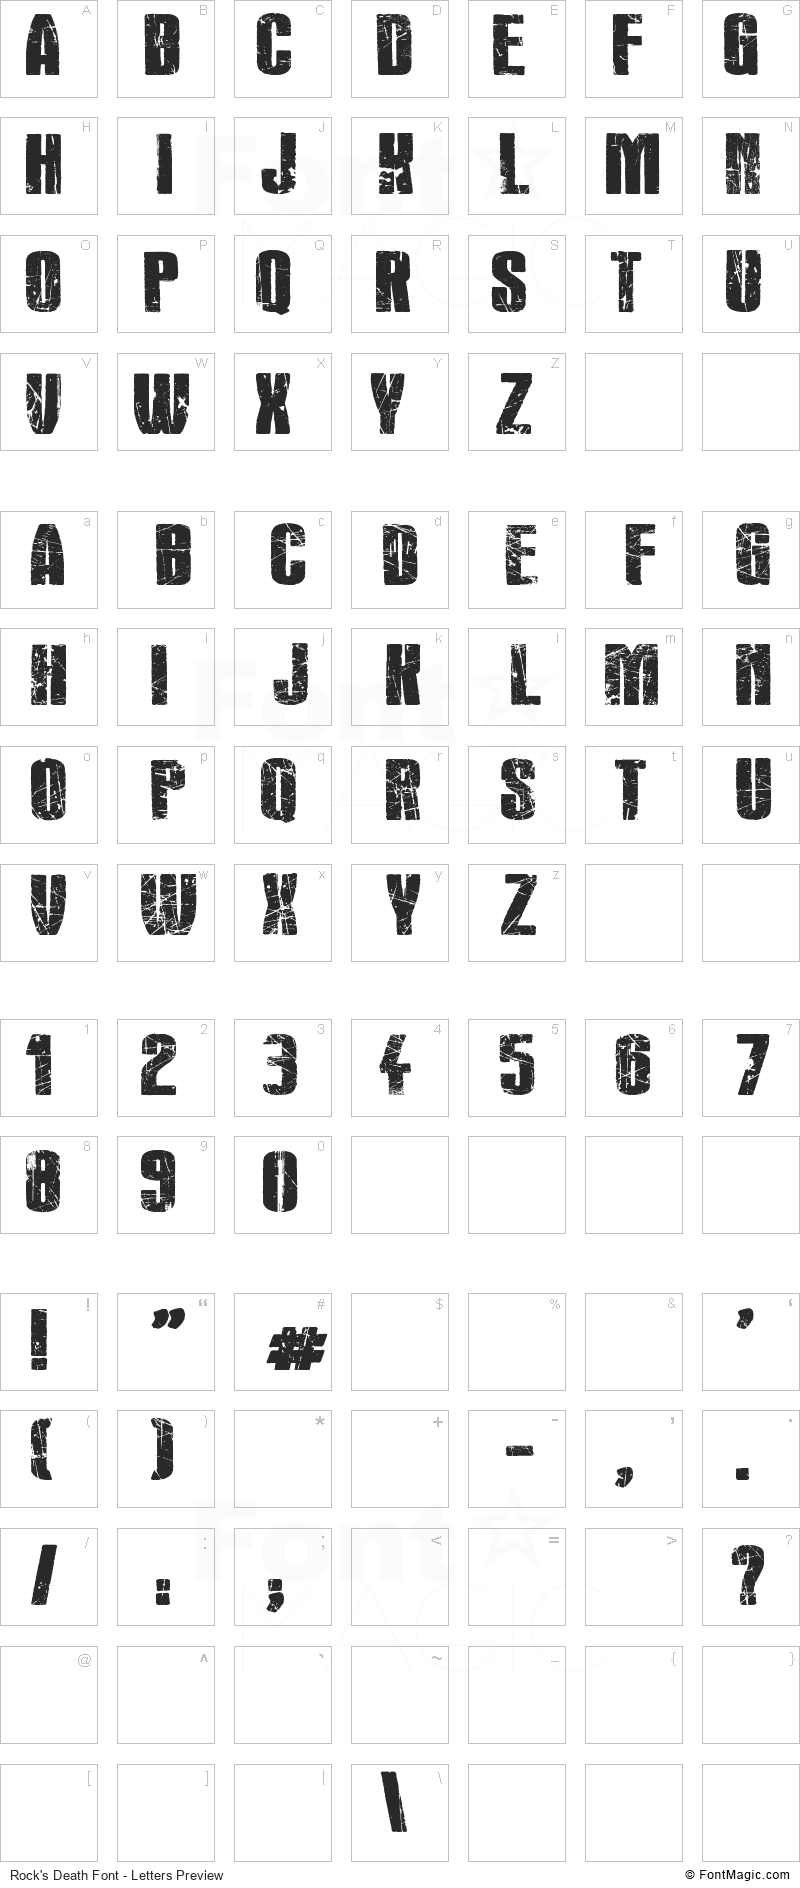 Rock’s Death Font - All Latters Preview Chart